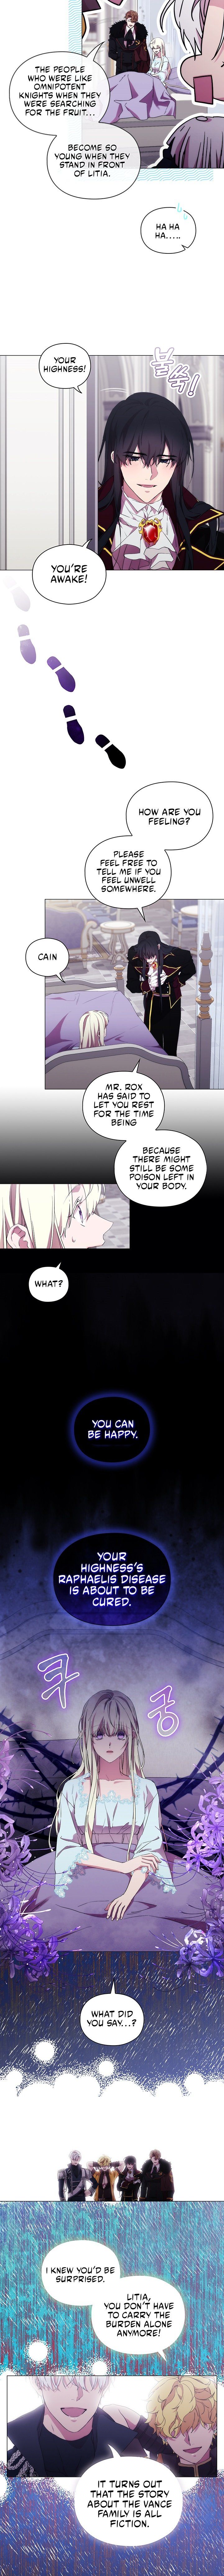 When the Evil Girl Loves (When the Villainess Loves) Chapter 94 page 4 - MangaWeebs.in